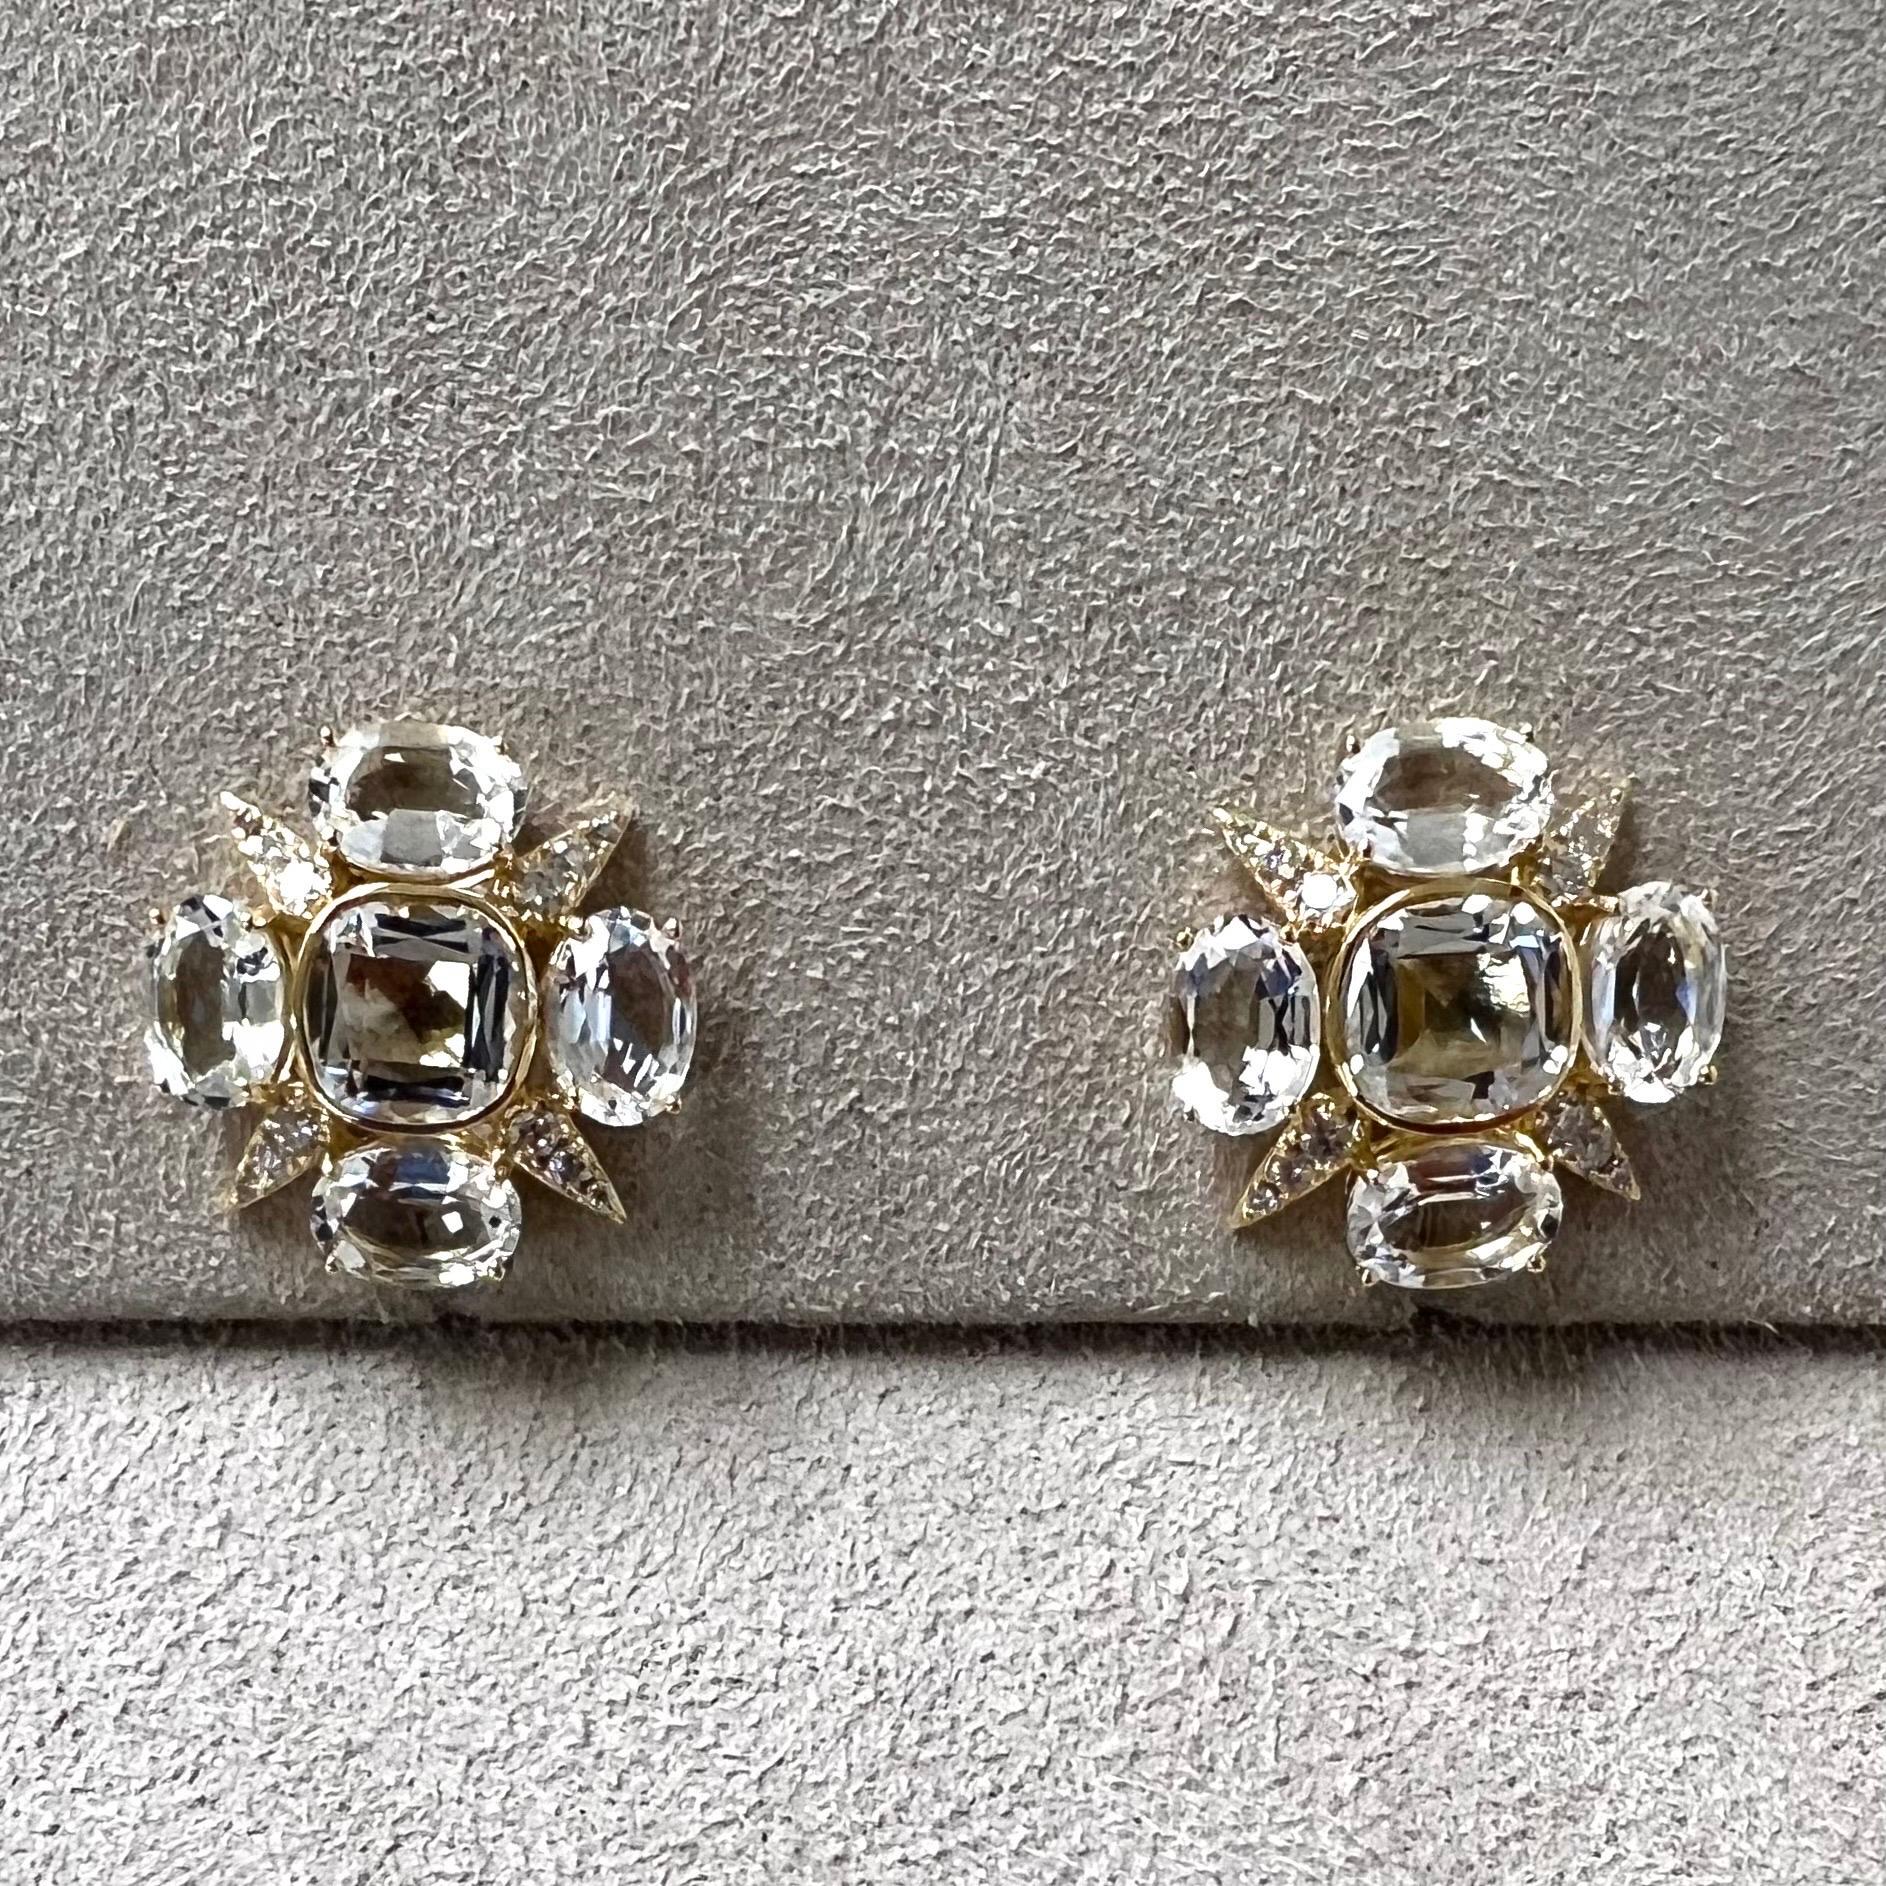 Created in 18 karat yellow gold
Rock crystal 8 carats approx.
Diamonds 0.35 carat approx.
Post backs for pierced ears
Limited edition

Exquisitely designed in pure 18 karat yellow gold, these luxurious earrings showcase a shimmering rock crystal